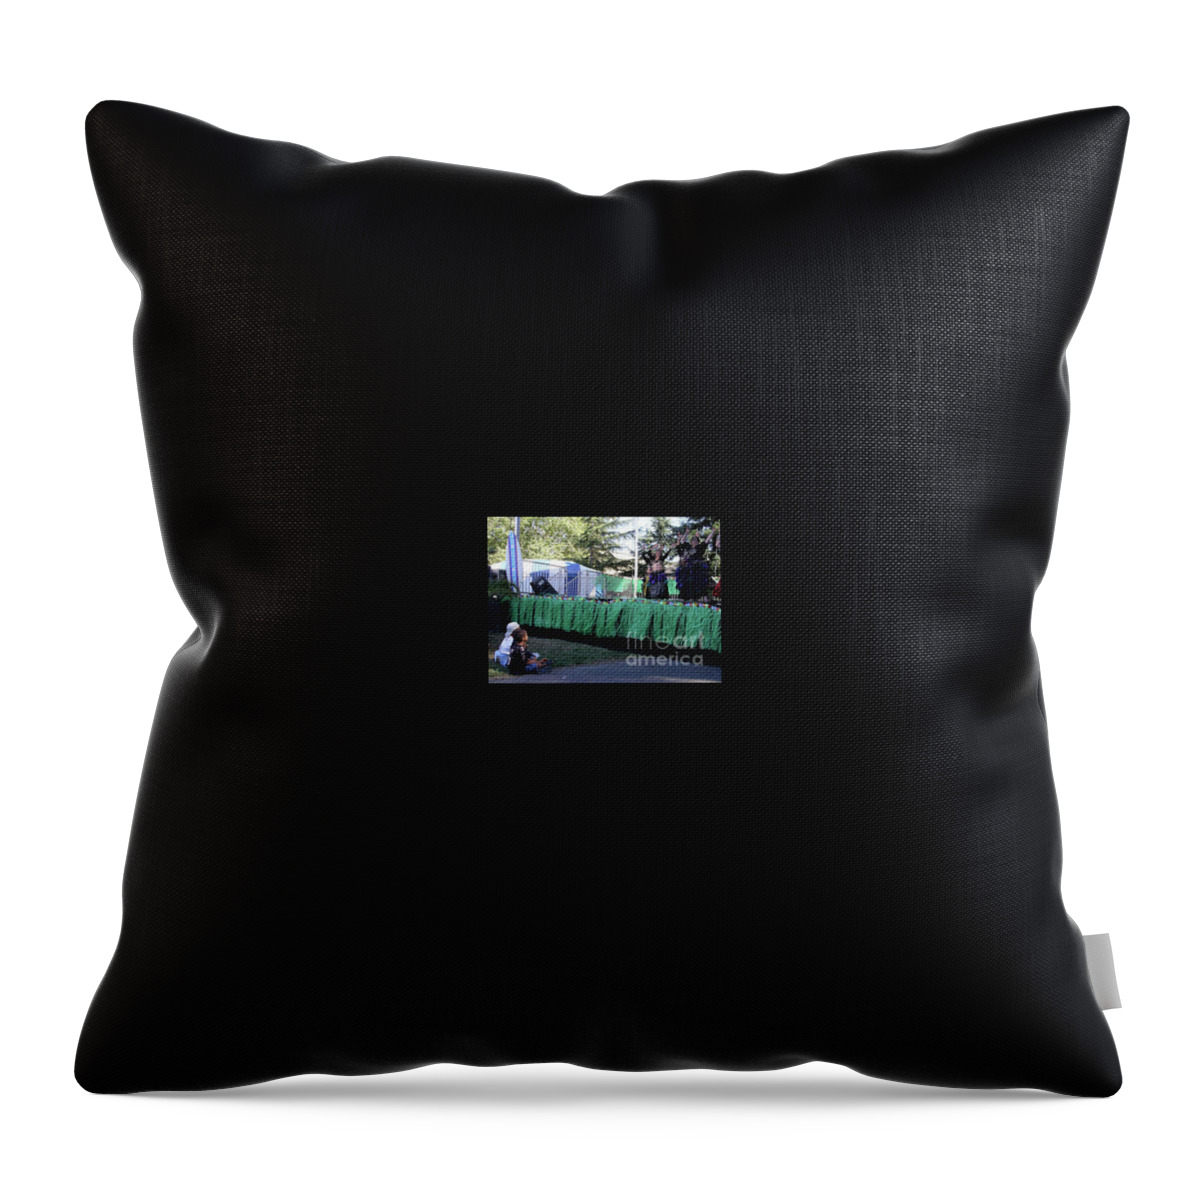 Children Throw Pillow featuring the photograph Mesmerized by those Bellies by Cynthia Marcopulos